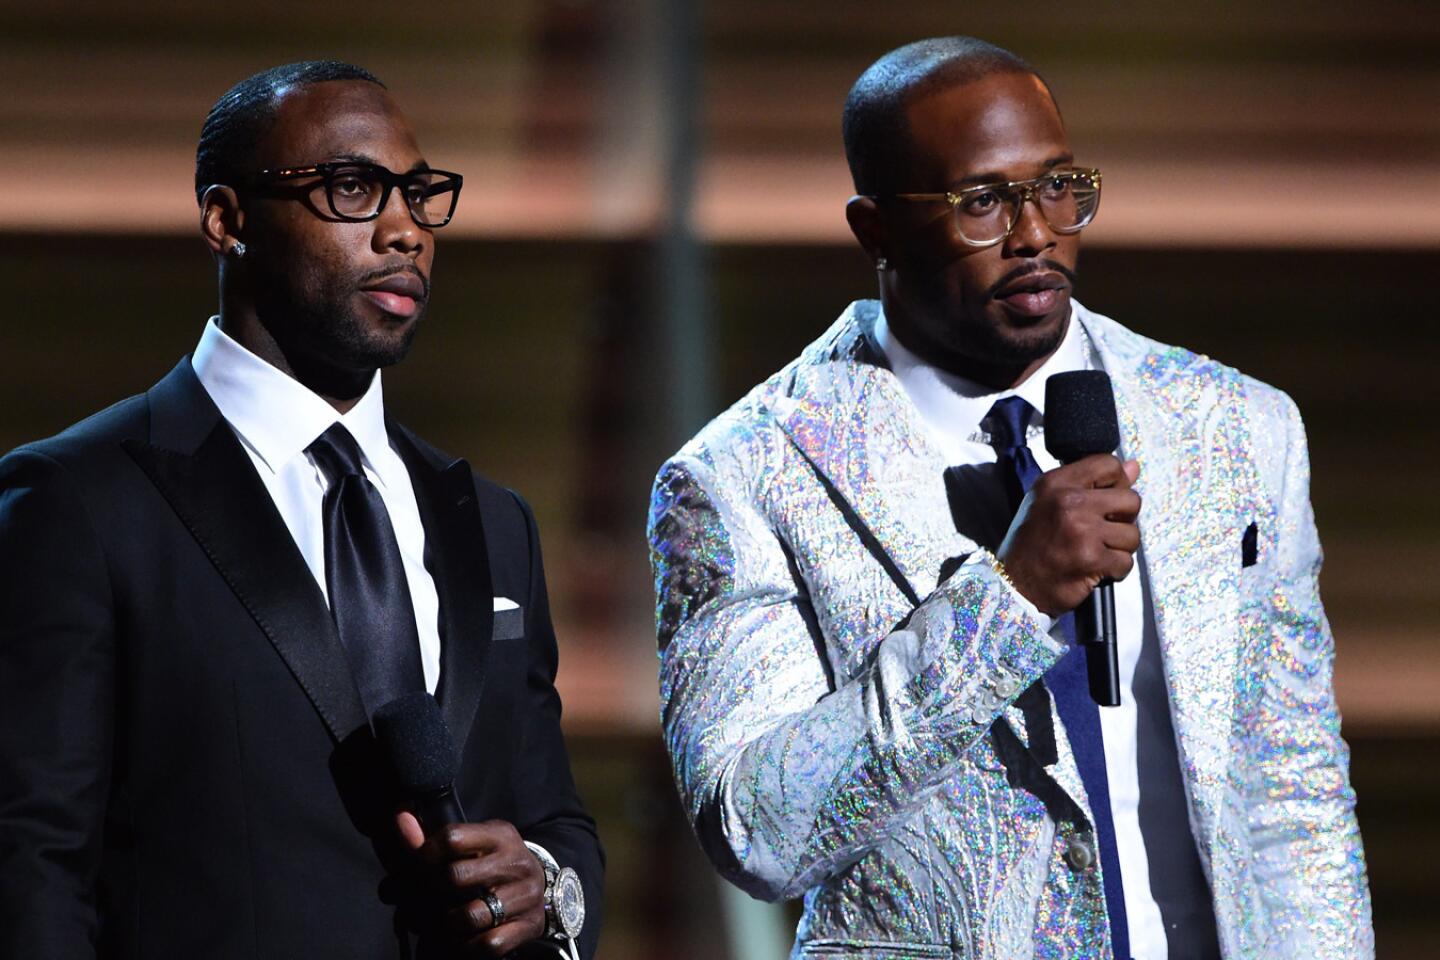 NFL player Anquan Boldin and NFL player Von Miller announce nominees onstage.